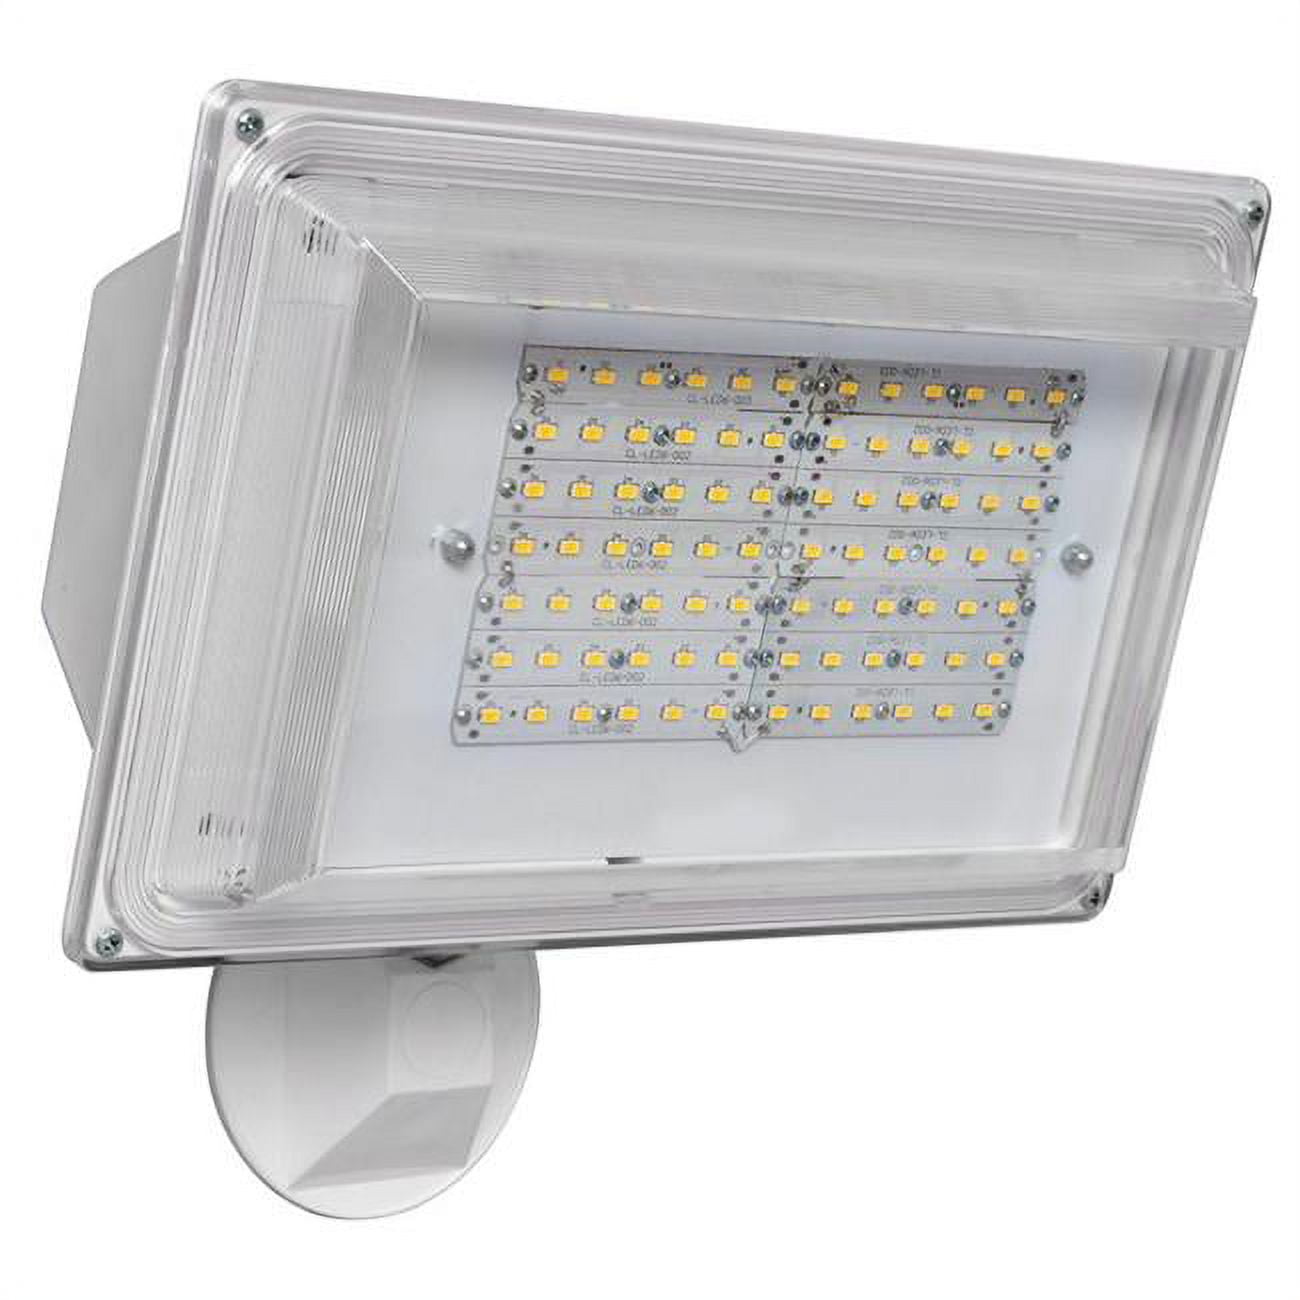 Led-sl42wh 42w Led Outdoor Wall Pack Lighting - White